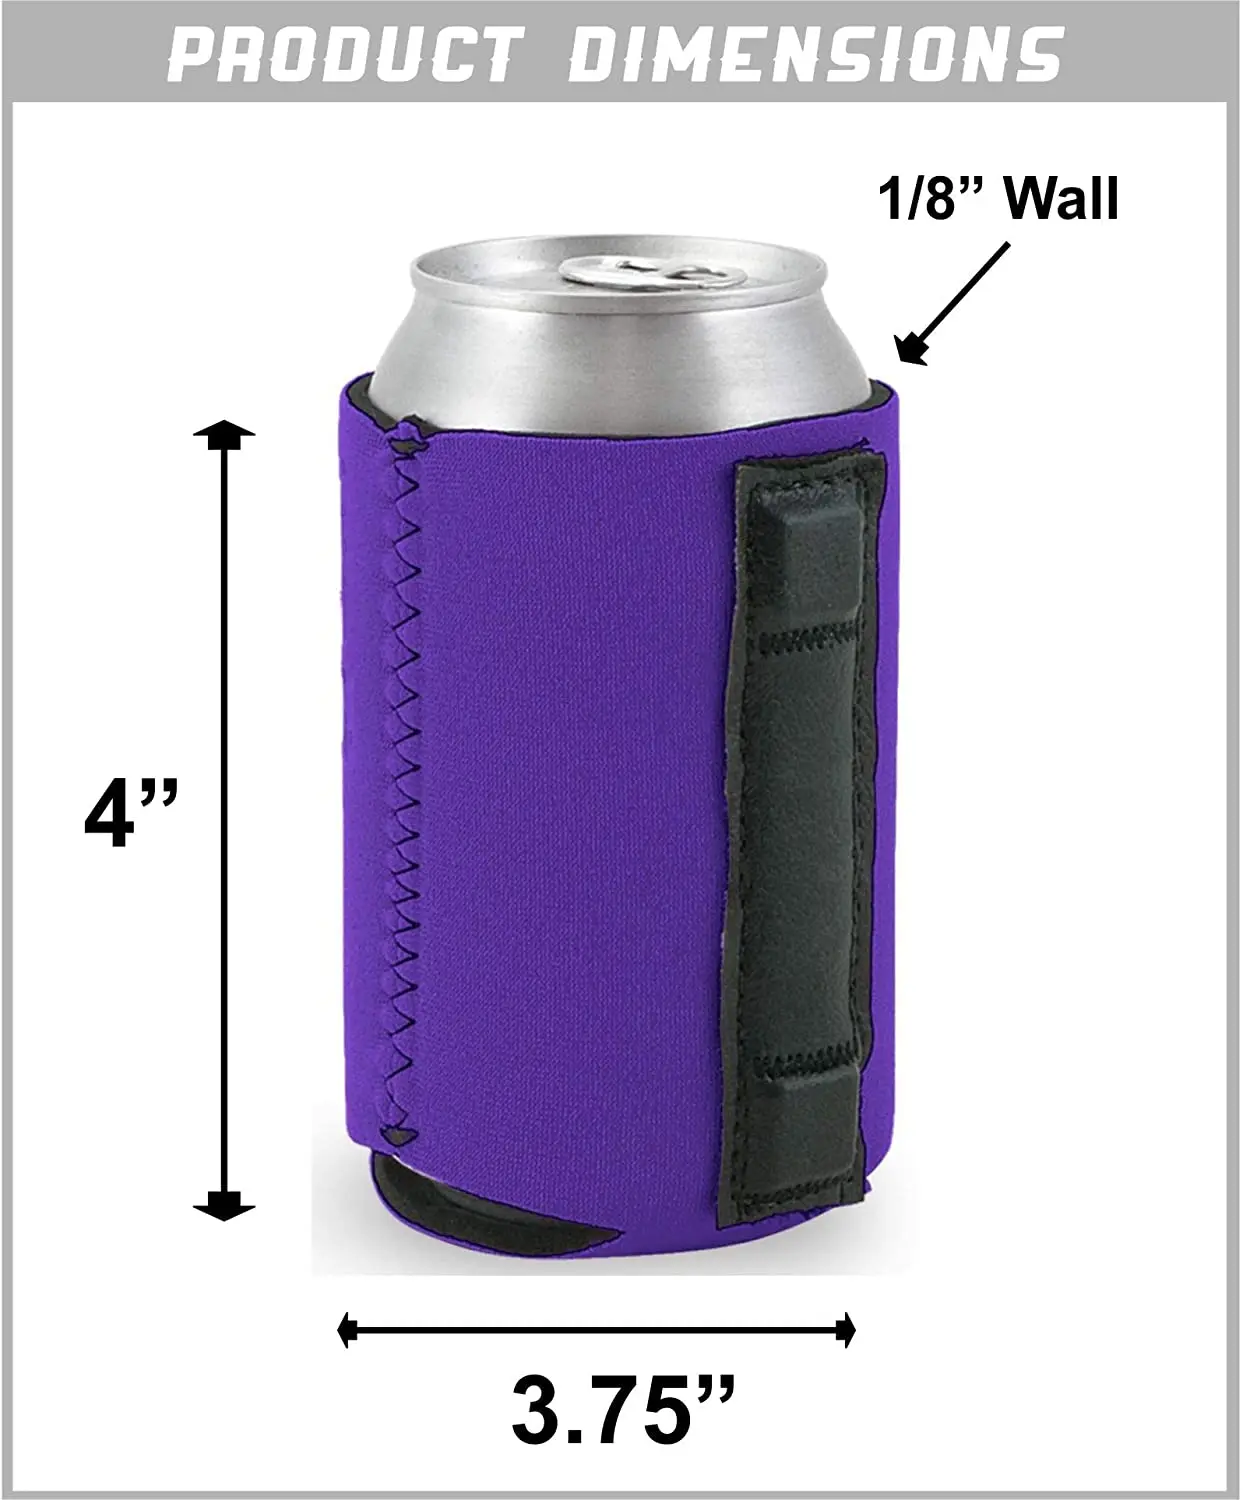 Magnetic Neoprene Collapsible Can Holder Can Cooler Koozy